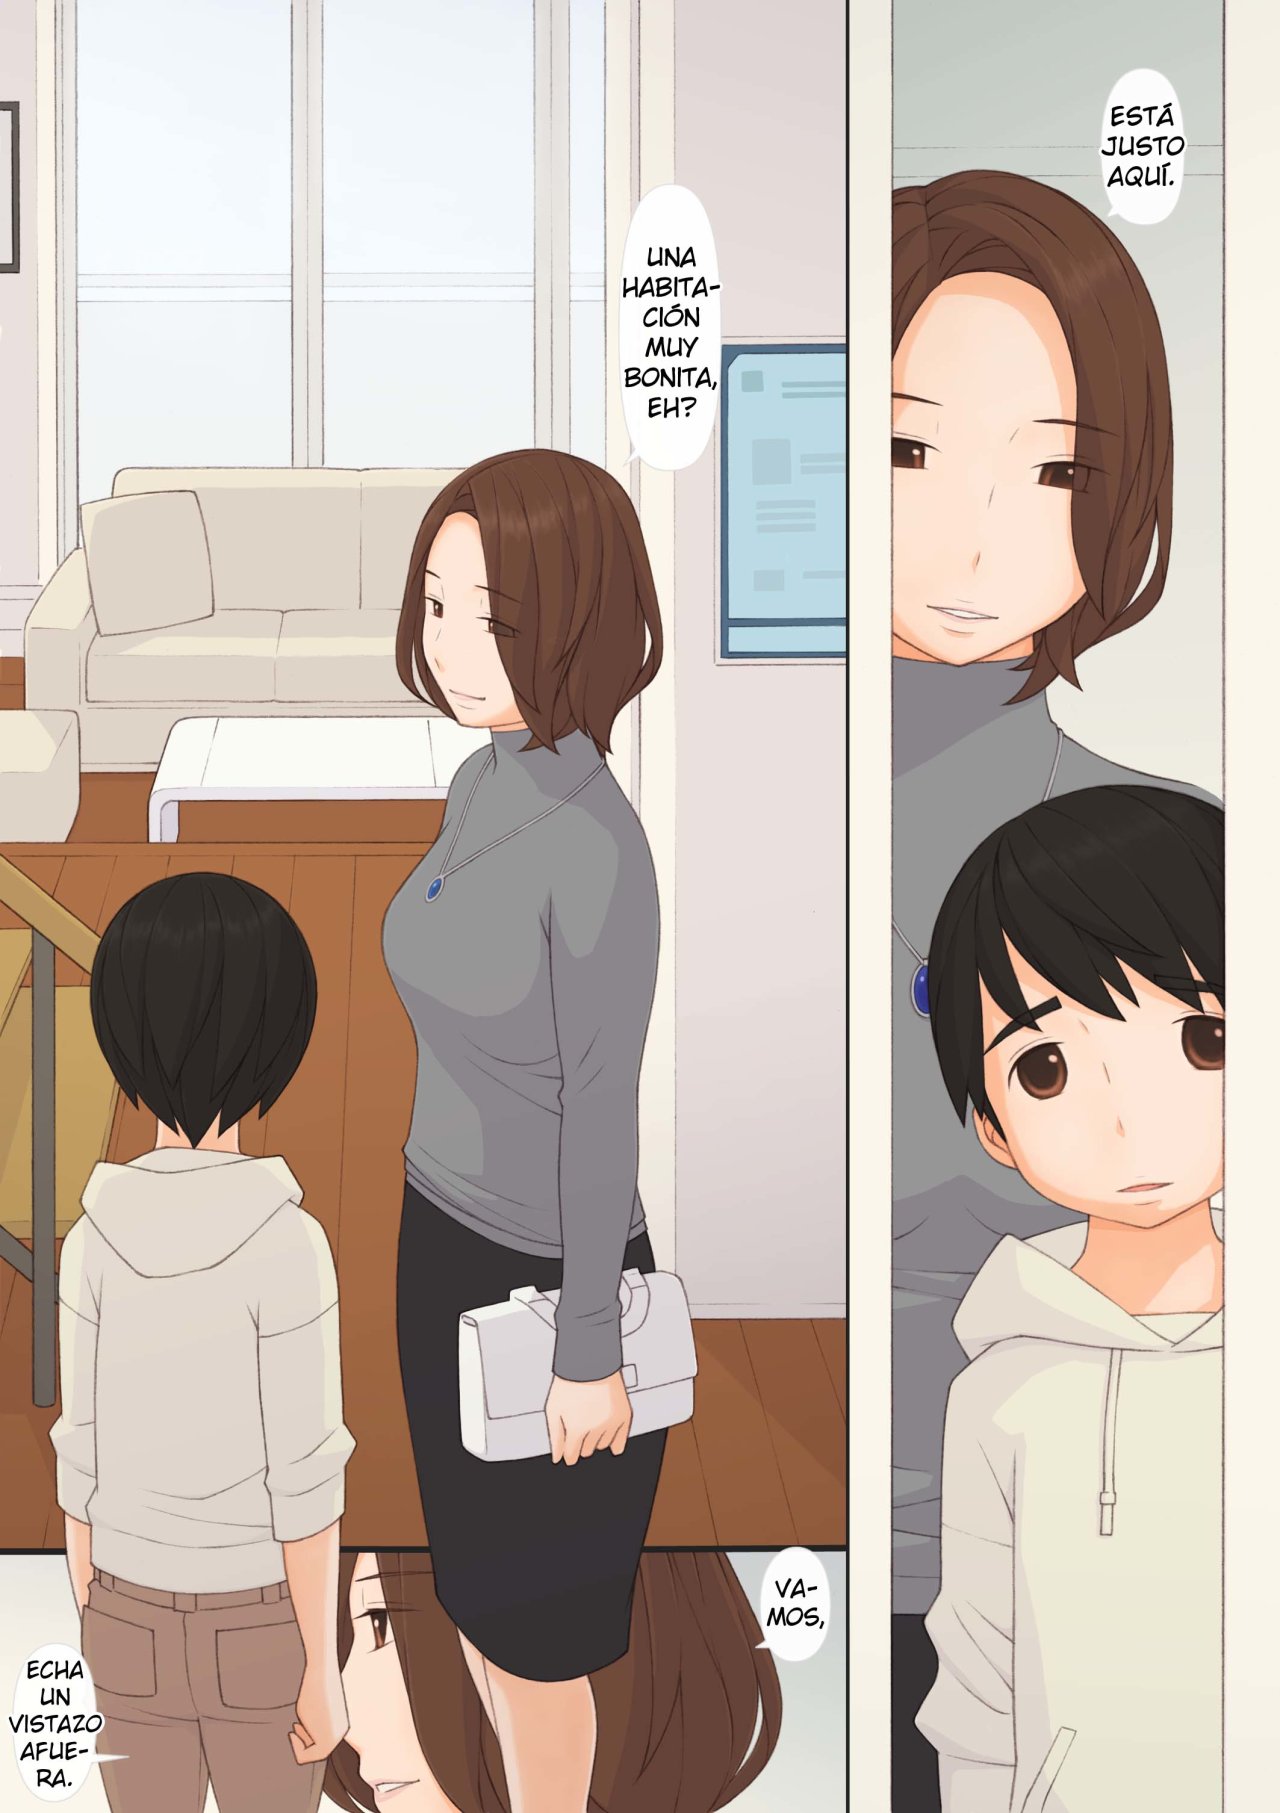 Doujin mom and son